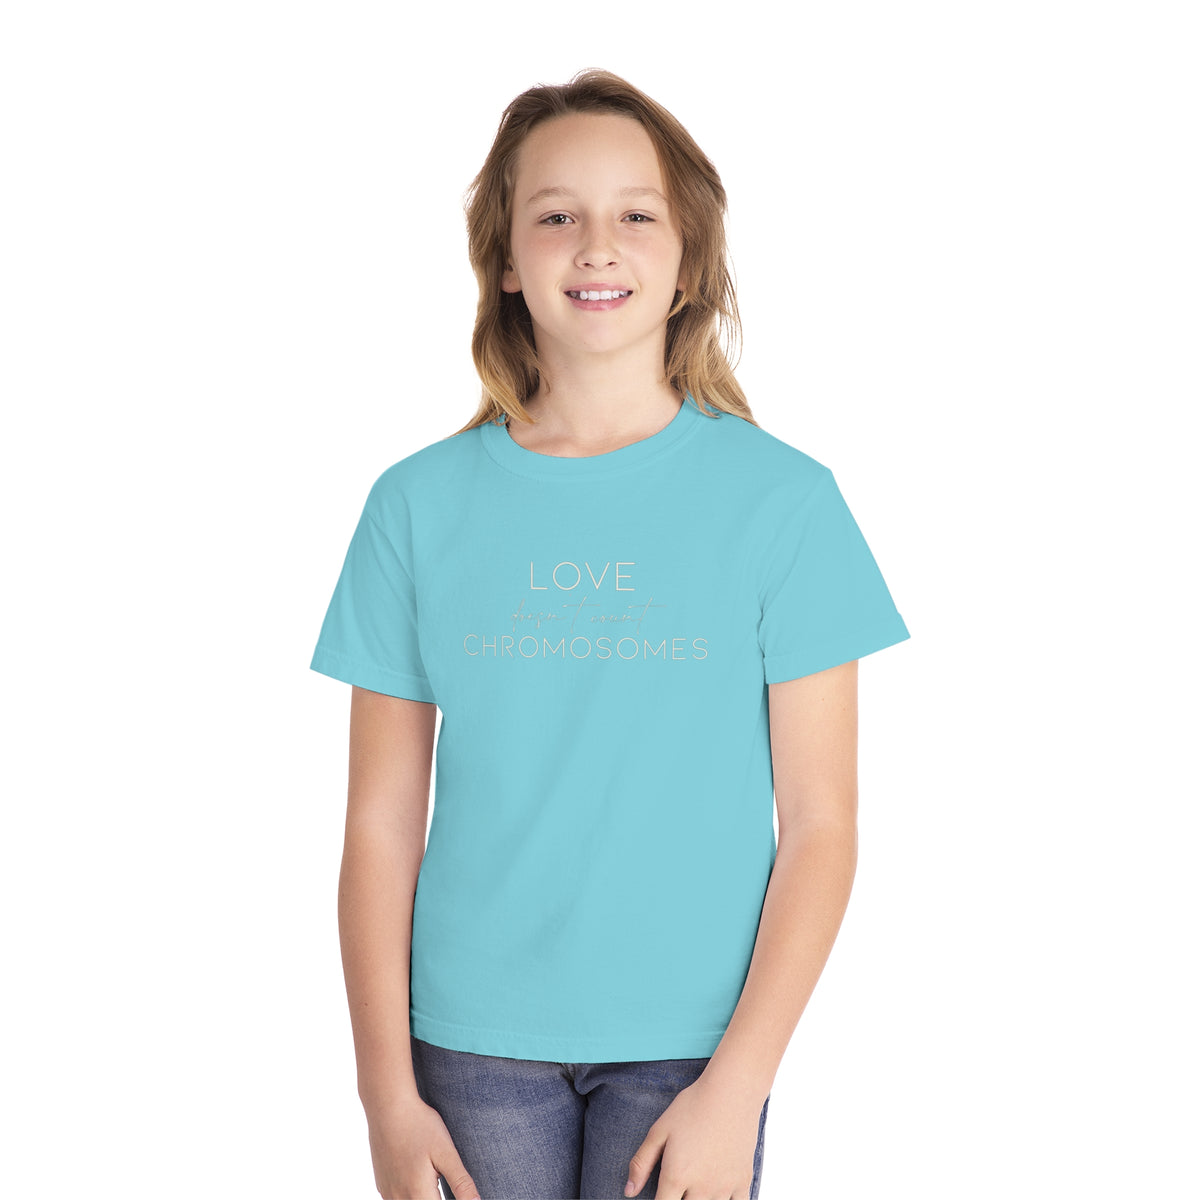 Love Doesn’t Count Chromosomes Comfort Colors Youth Midweight Tee